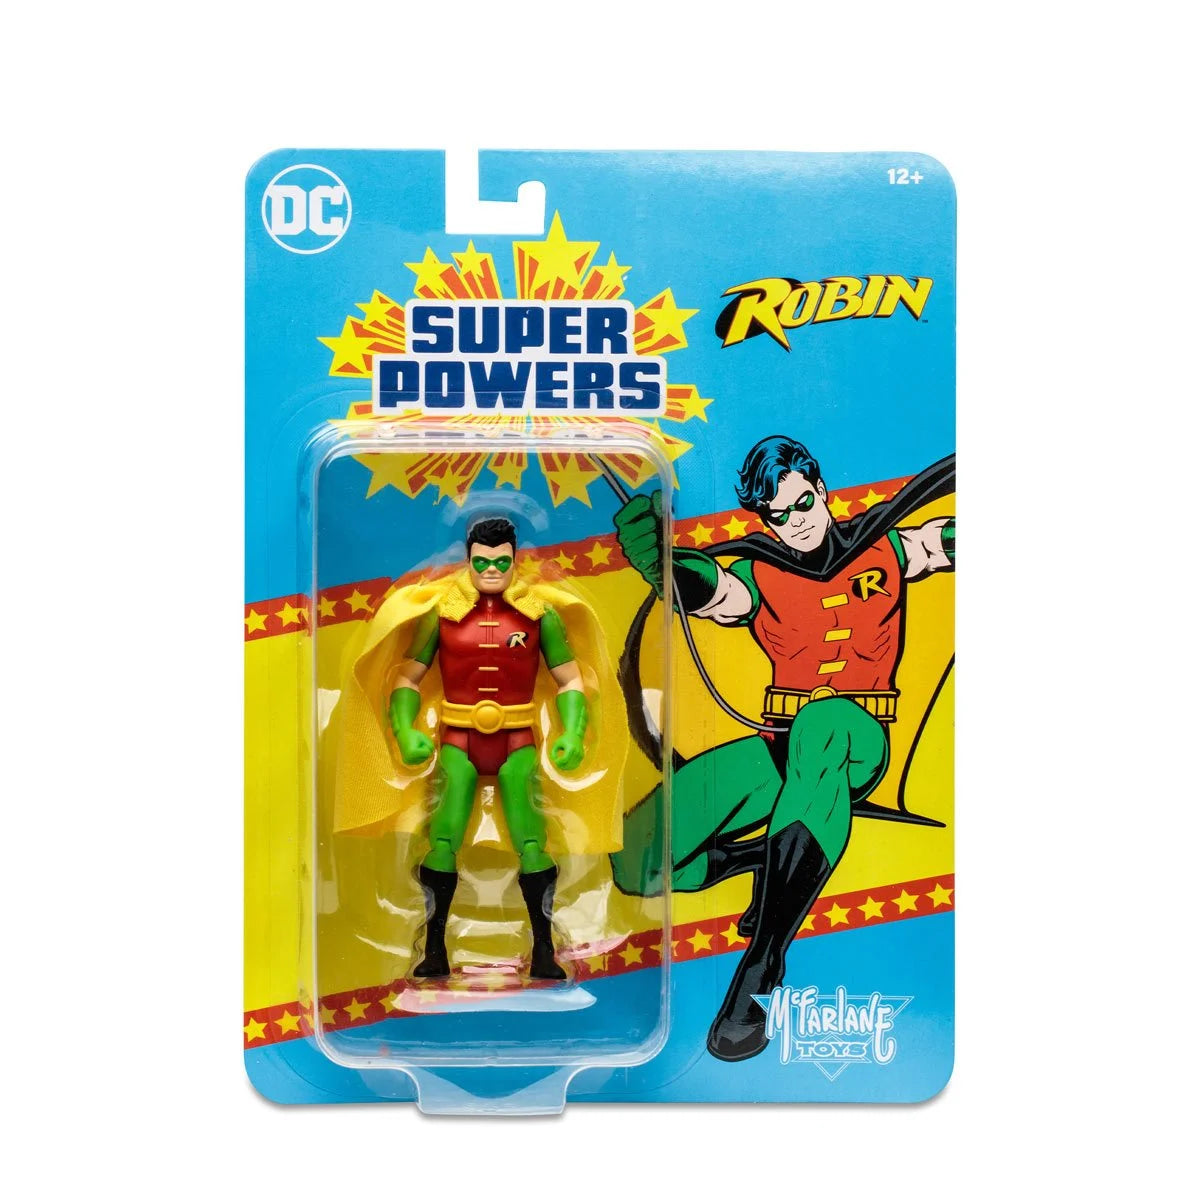 DC Super Powers Wave 4 Robin Tim Drake 4-Inch Scale Action Figure front view - Heretoserveyou